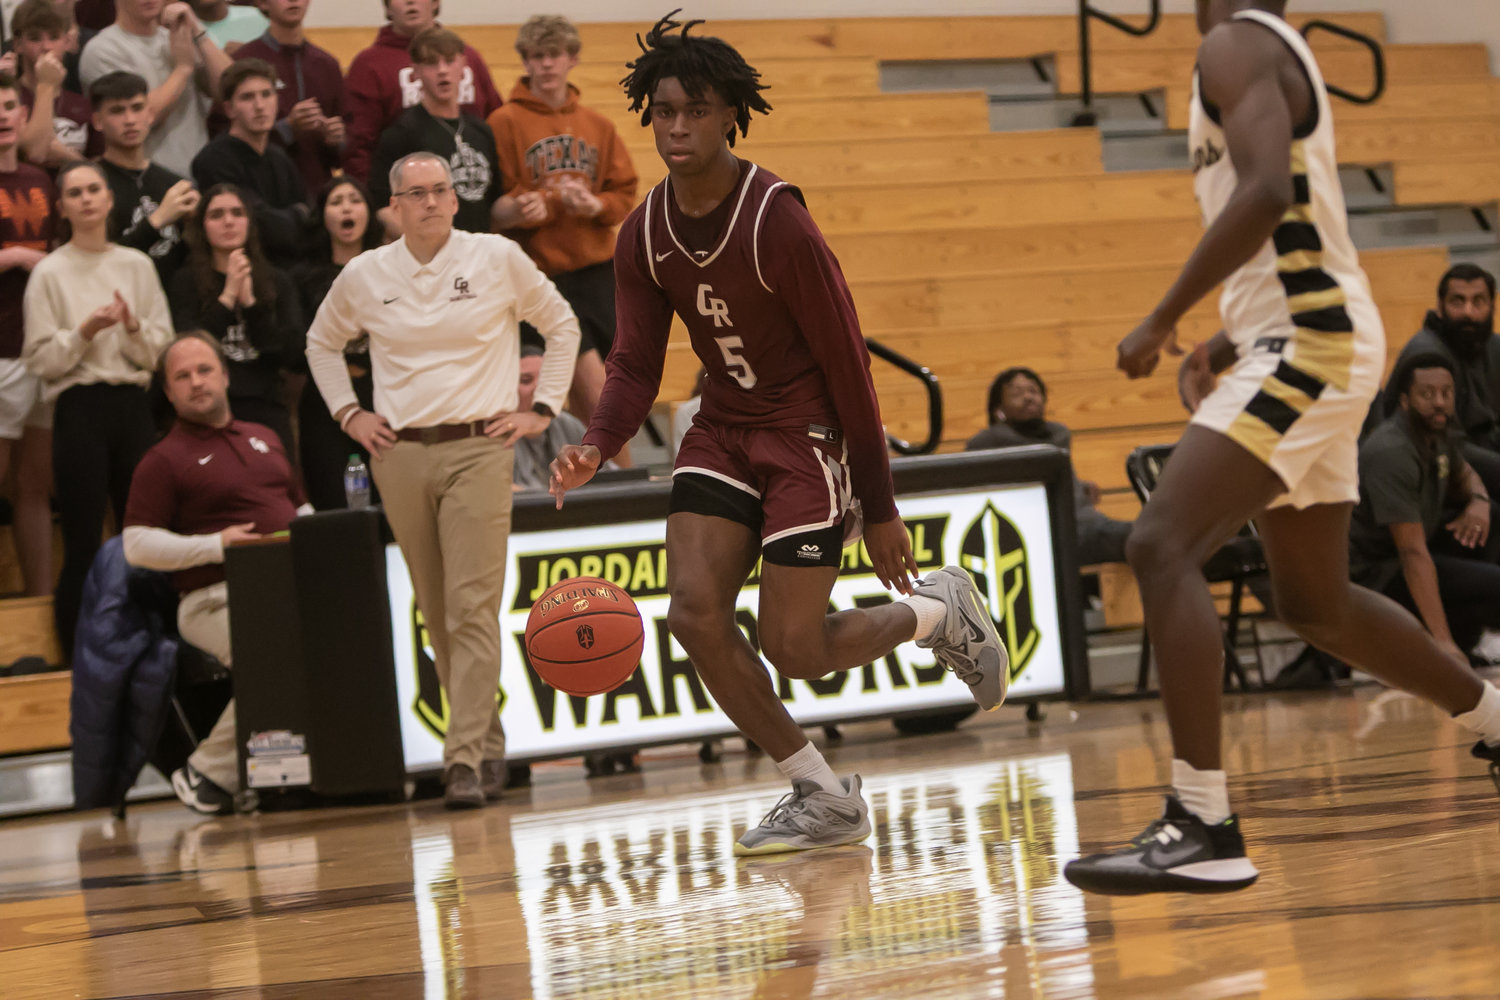 Emmanuel Gregory dribbles the ball down the court during Tuesday's game between Cinco Ranch and Jordan at the Jordan gym.